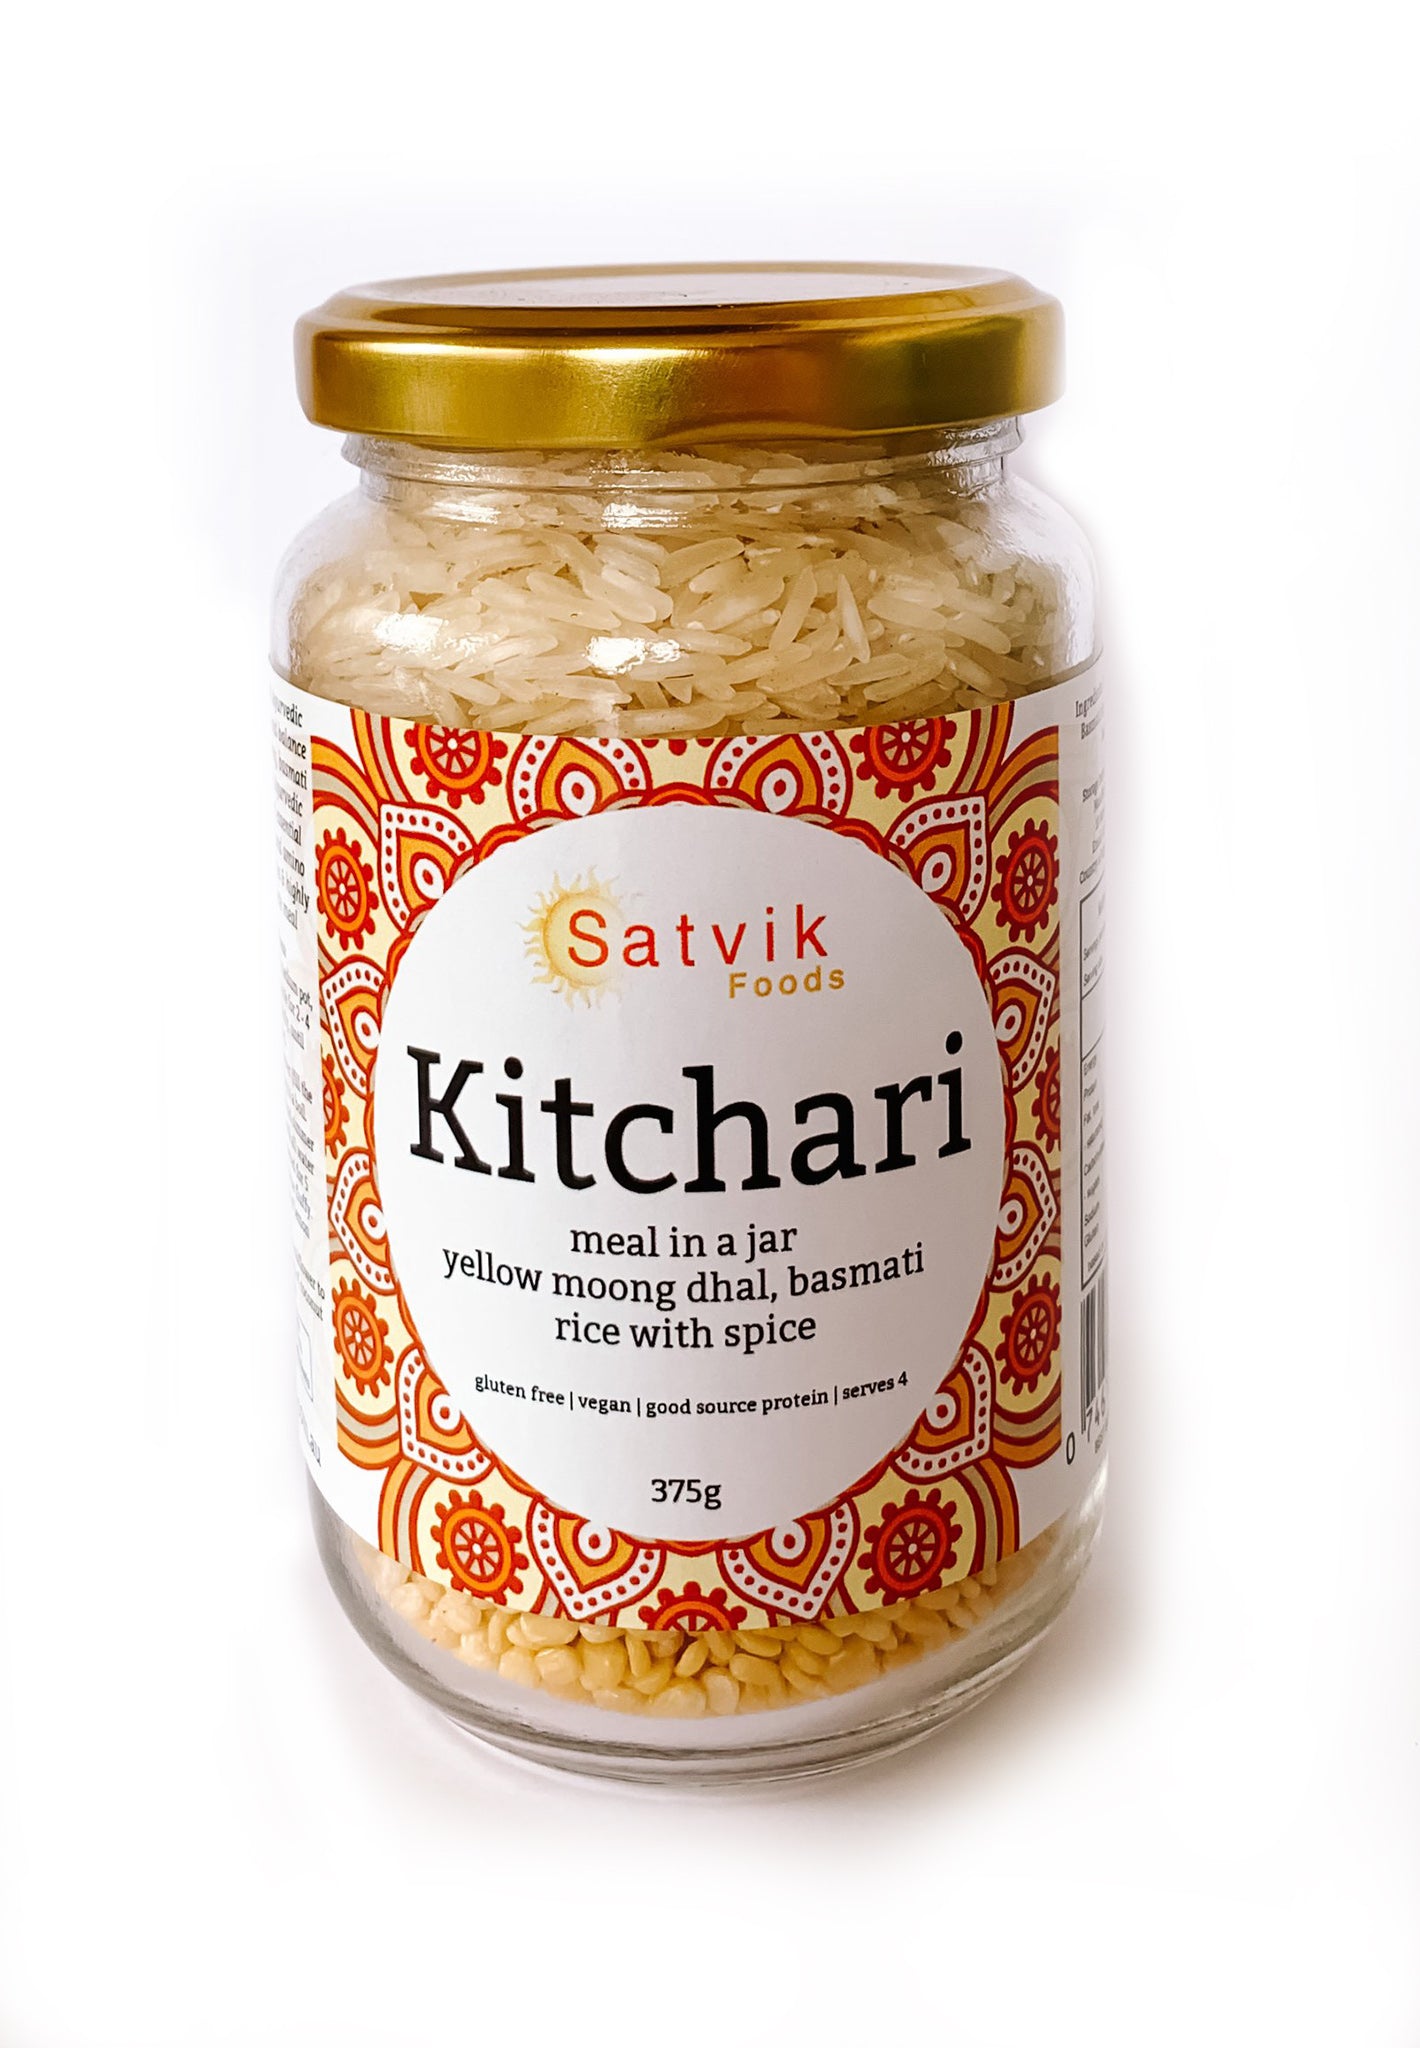 beautiful kitchari is a traditional cleansing dish in the Ayurveda diet